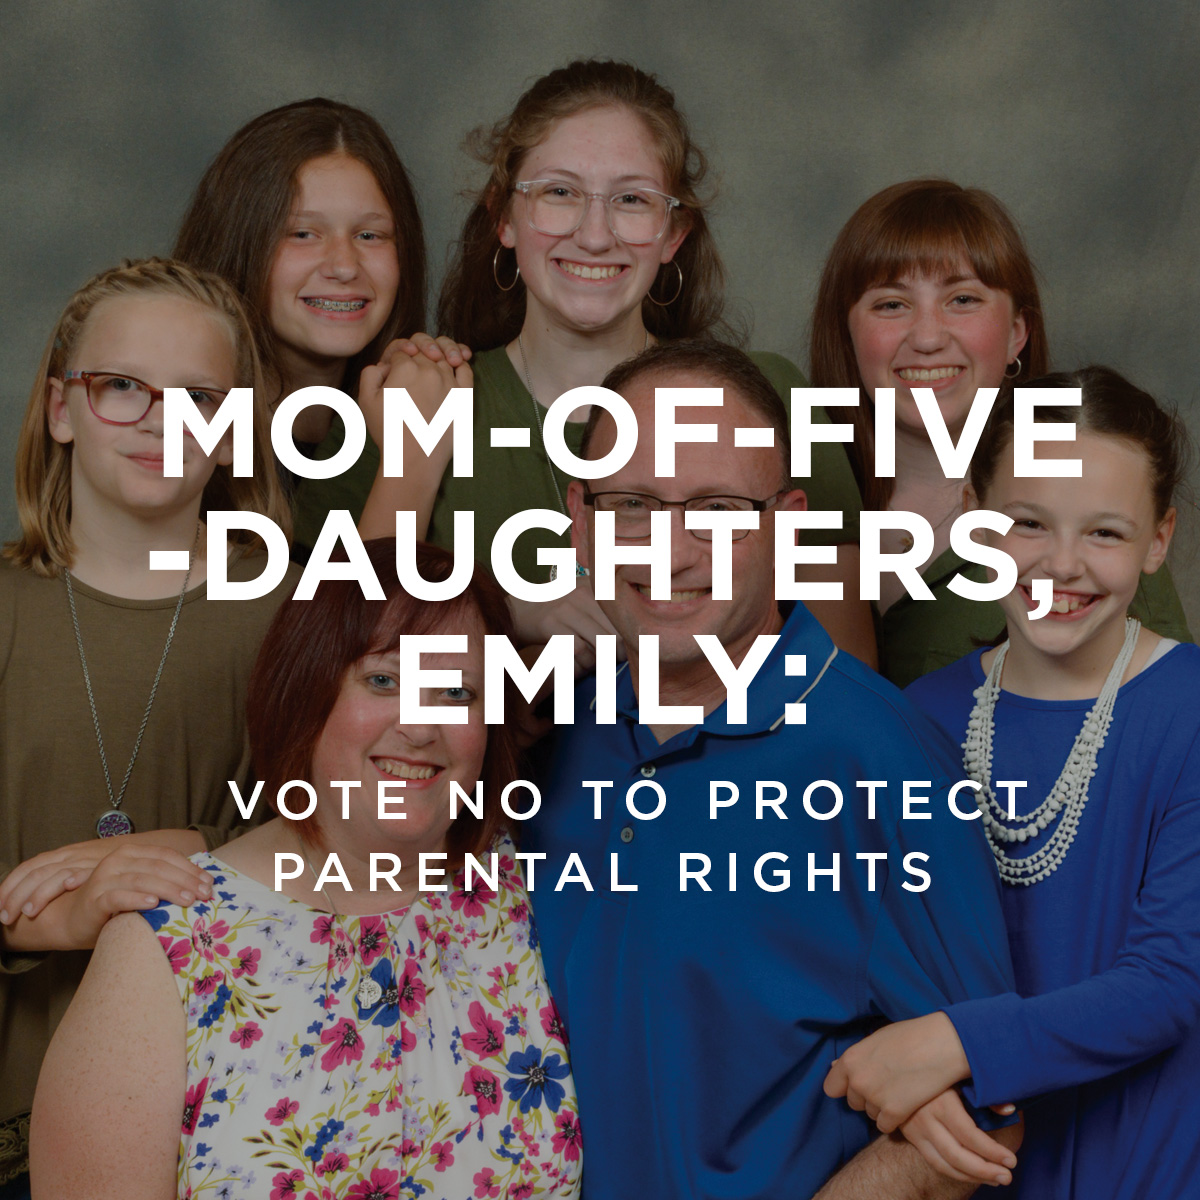 Mom-of-five-daughters, Emily: Vote no to protect parental rights